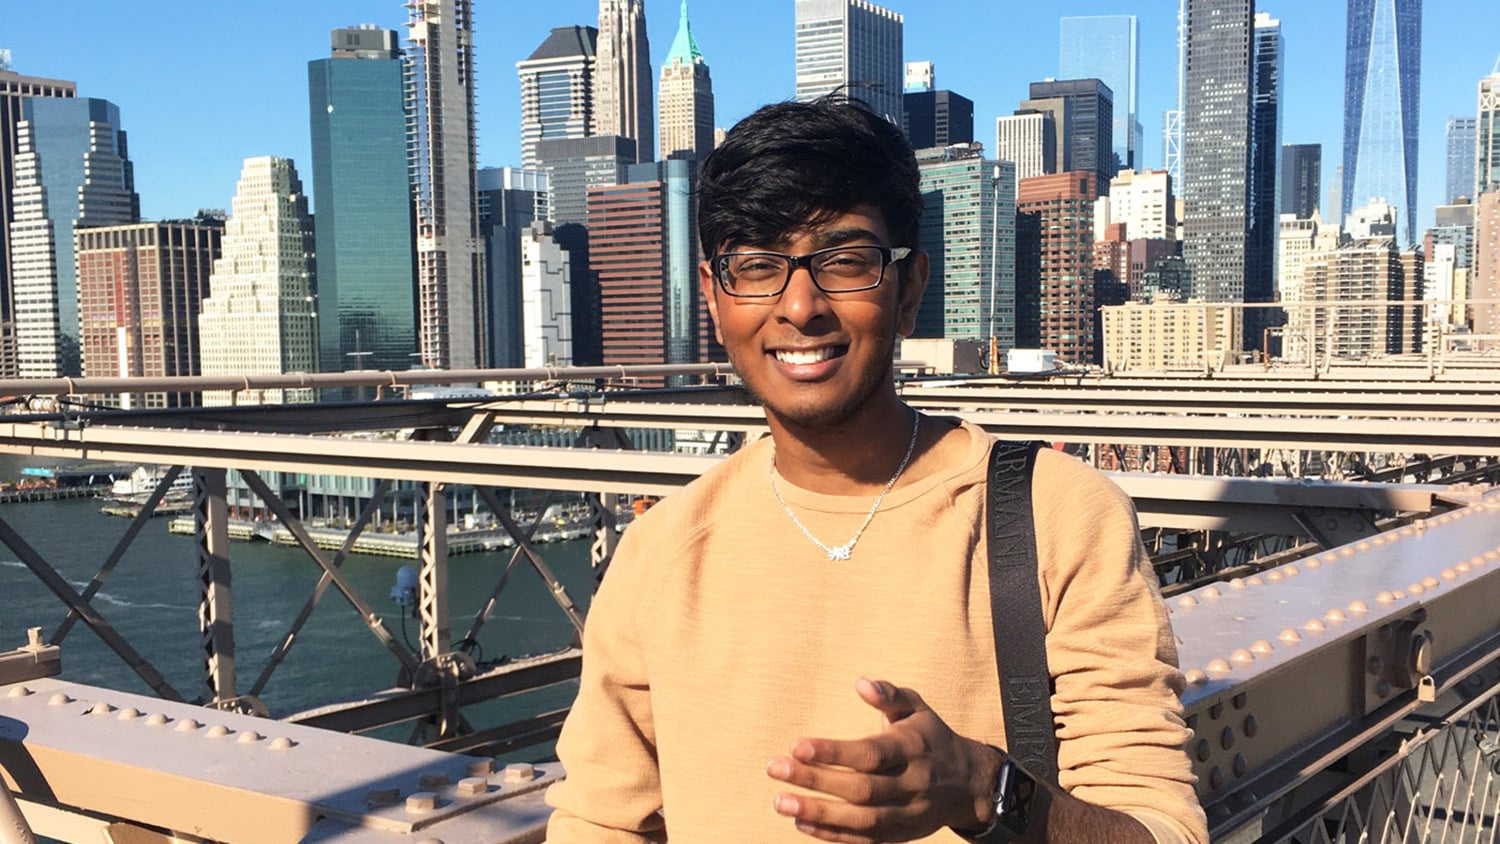 Kiran Soma is wearing eye glasses and a beige swetaer. He is posing in front of a bridge in a city crowded with high rises.